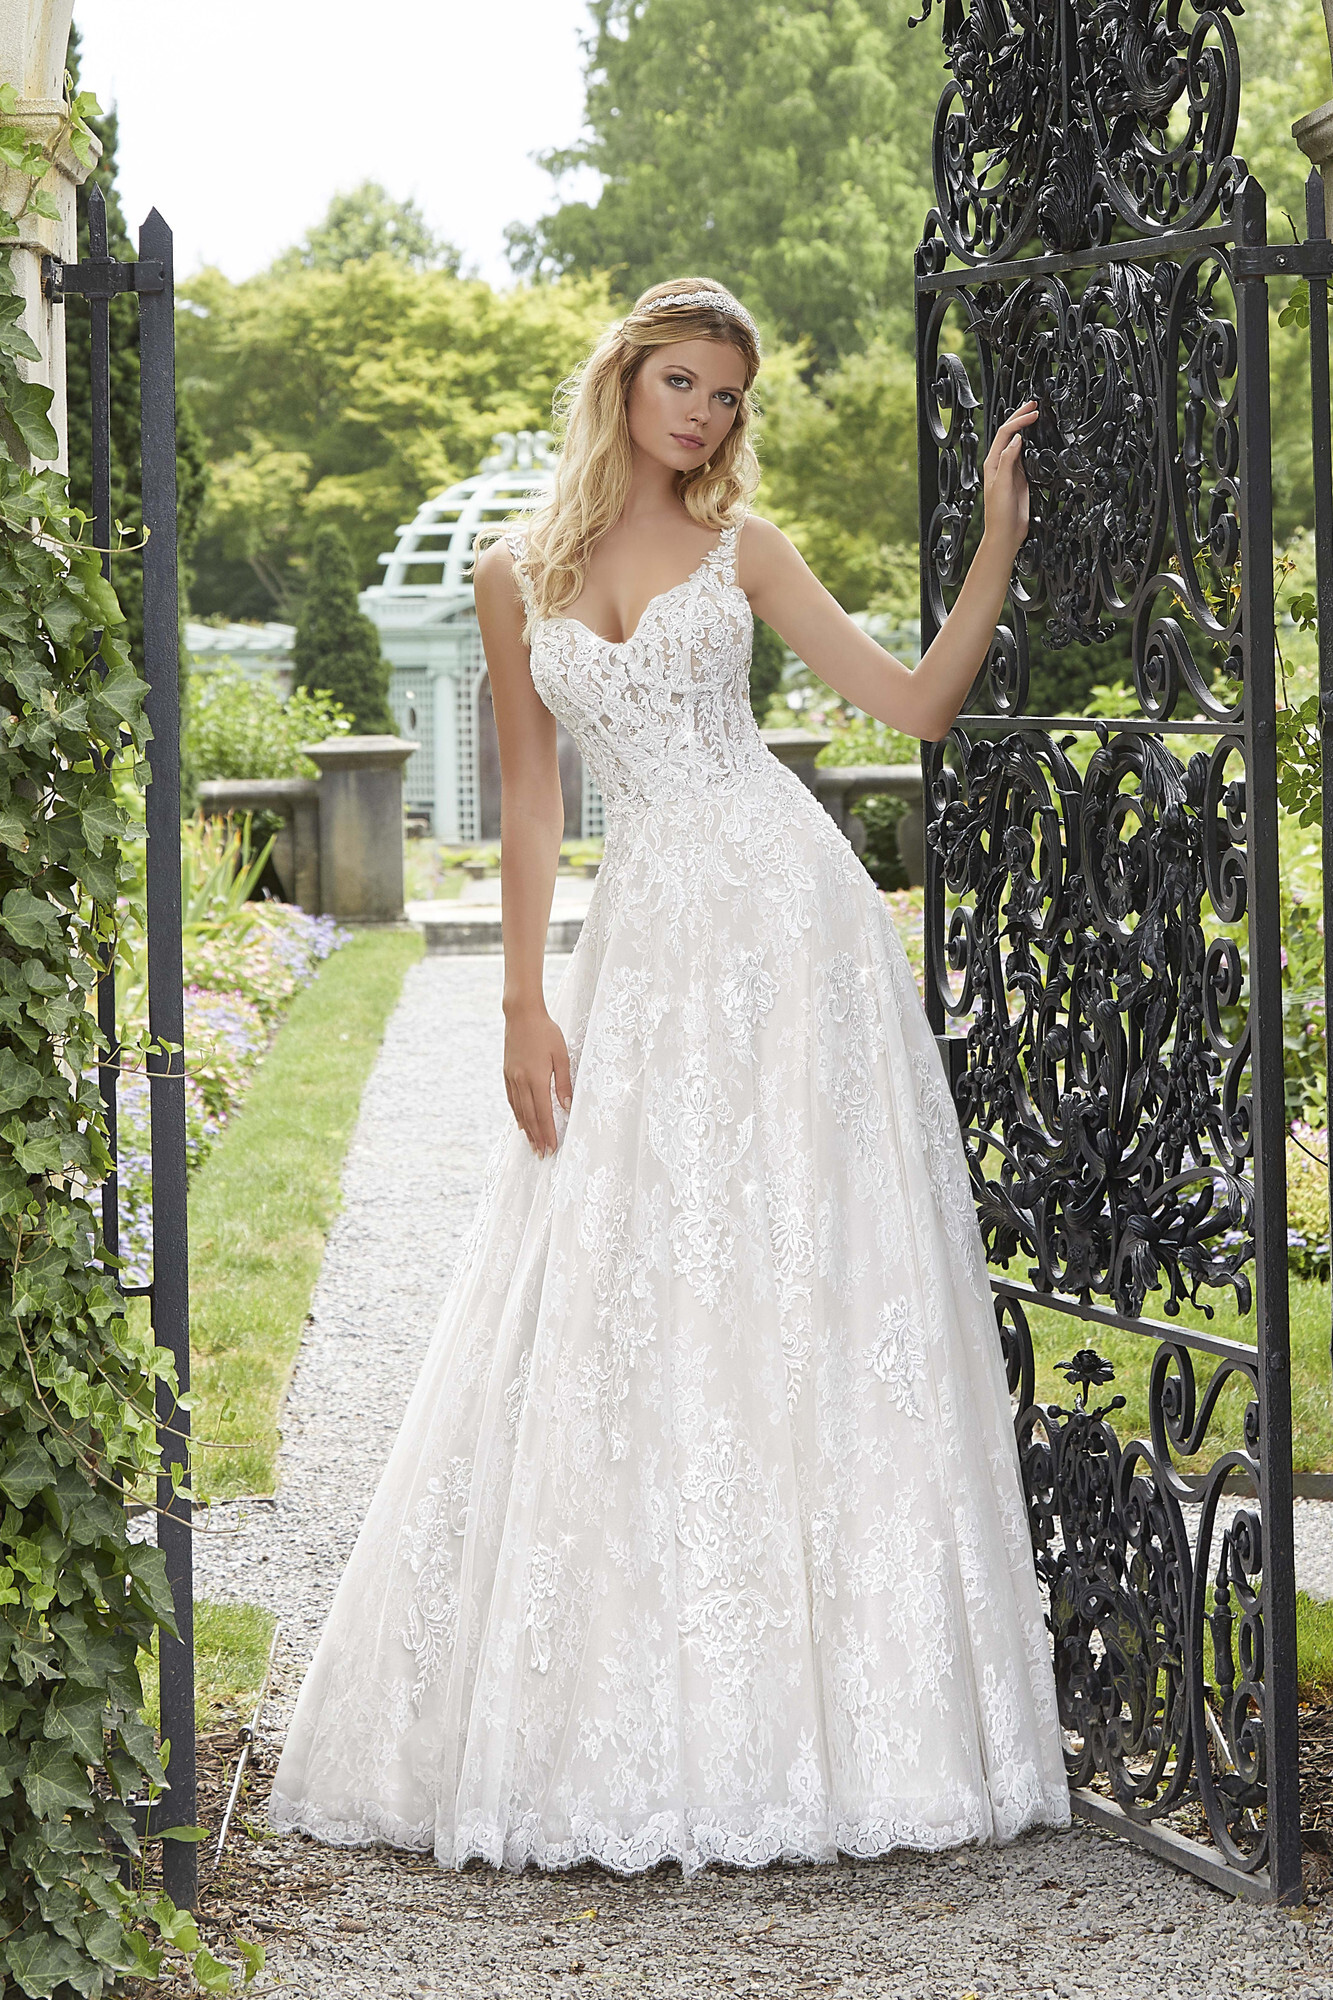 2029 Wedding Dress from Morilee - hitched.co.uk